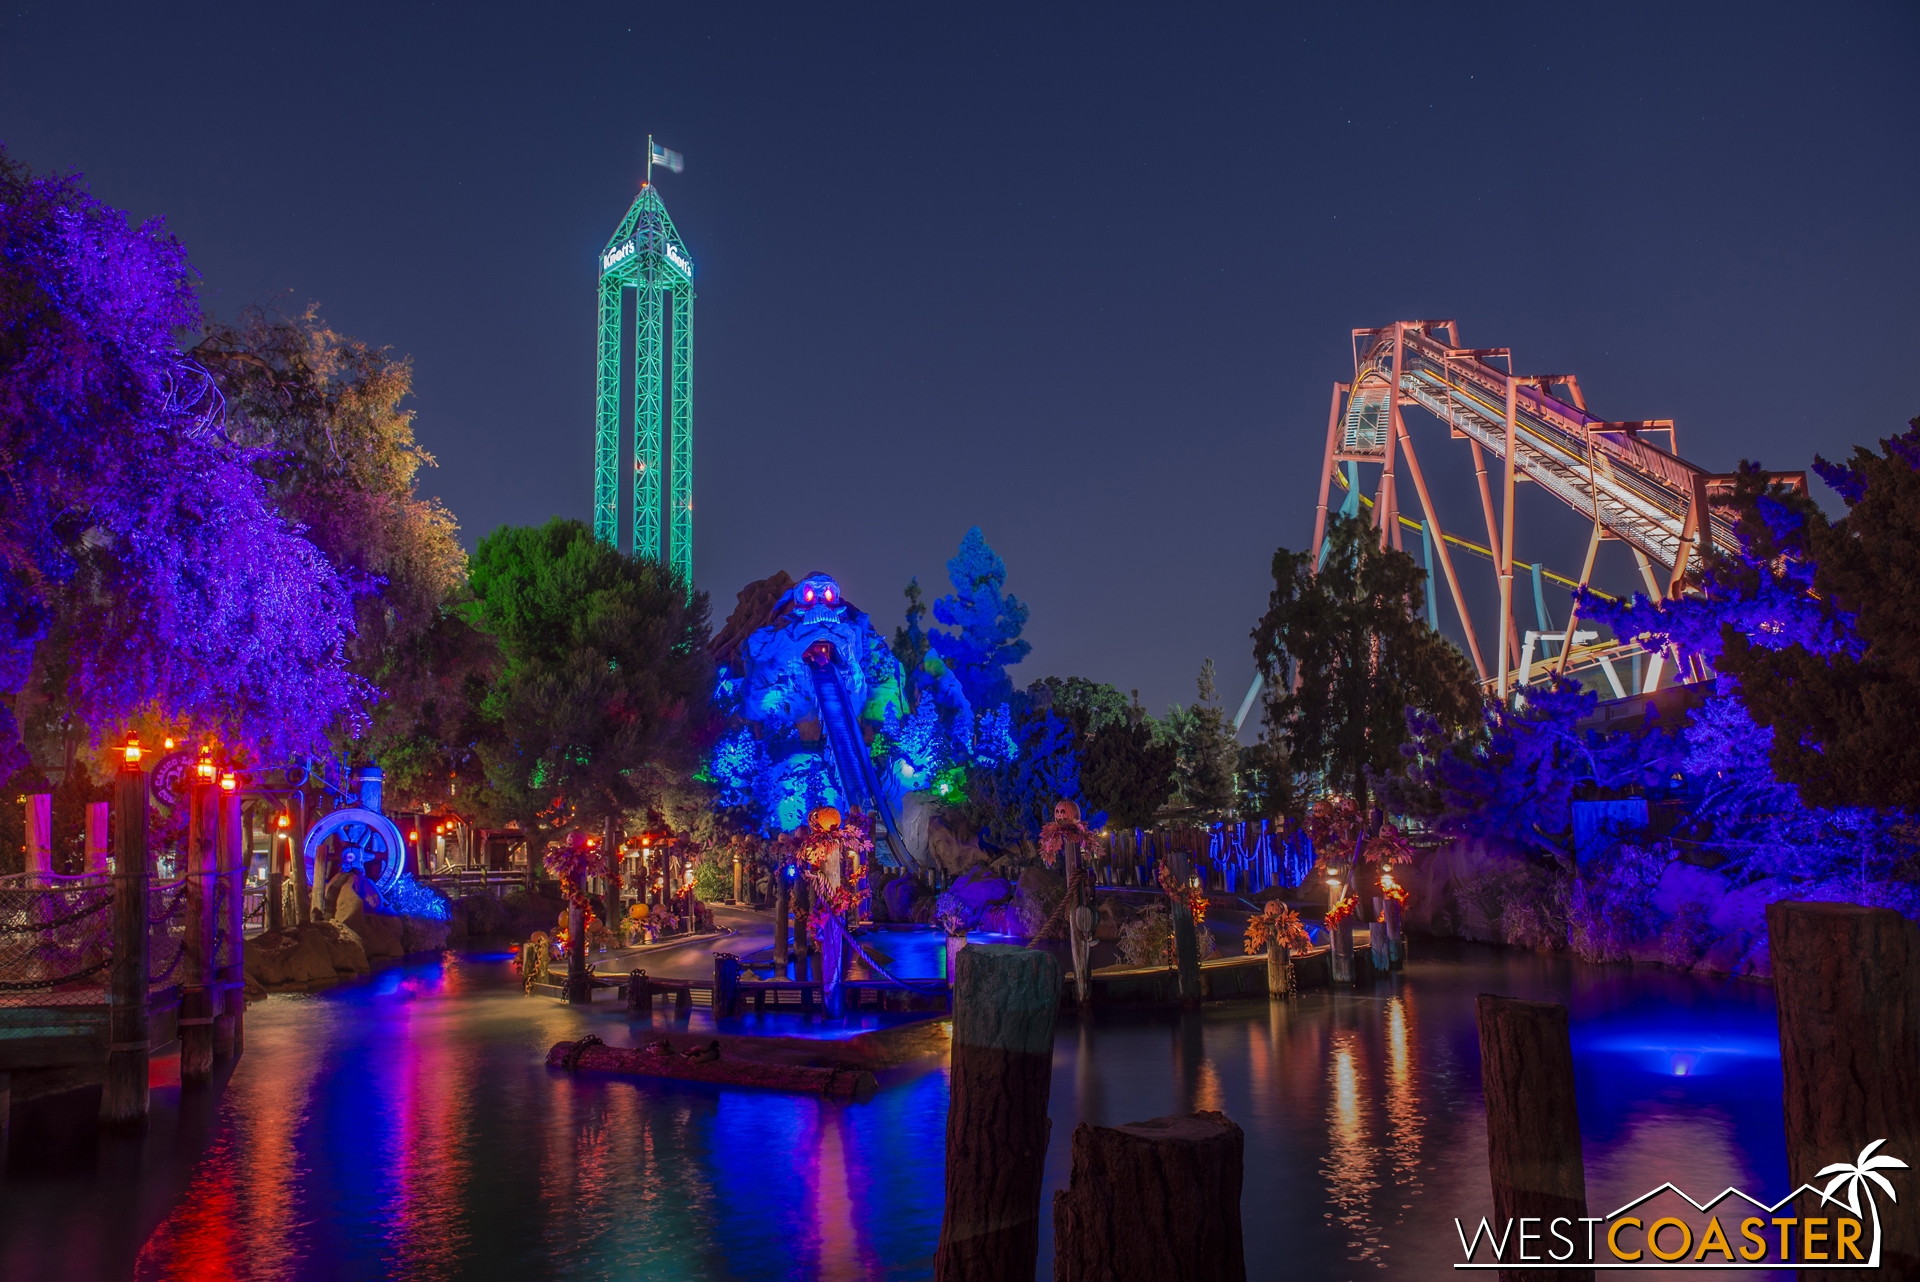  The Log Ride is gorgeous at night, in front of Supreme Scream and Silver Bullet. 